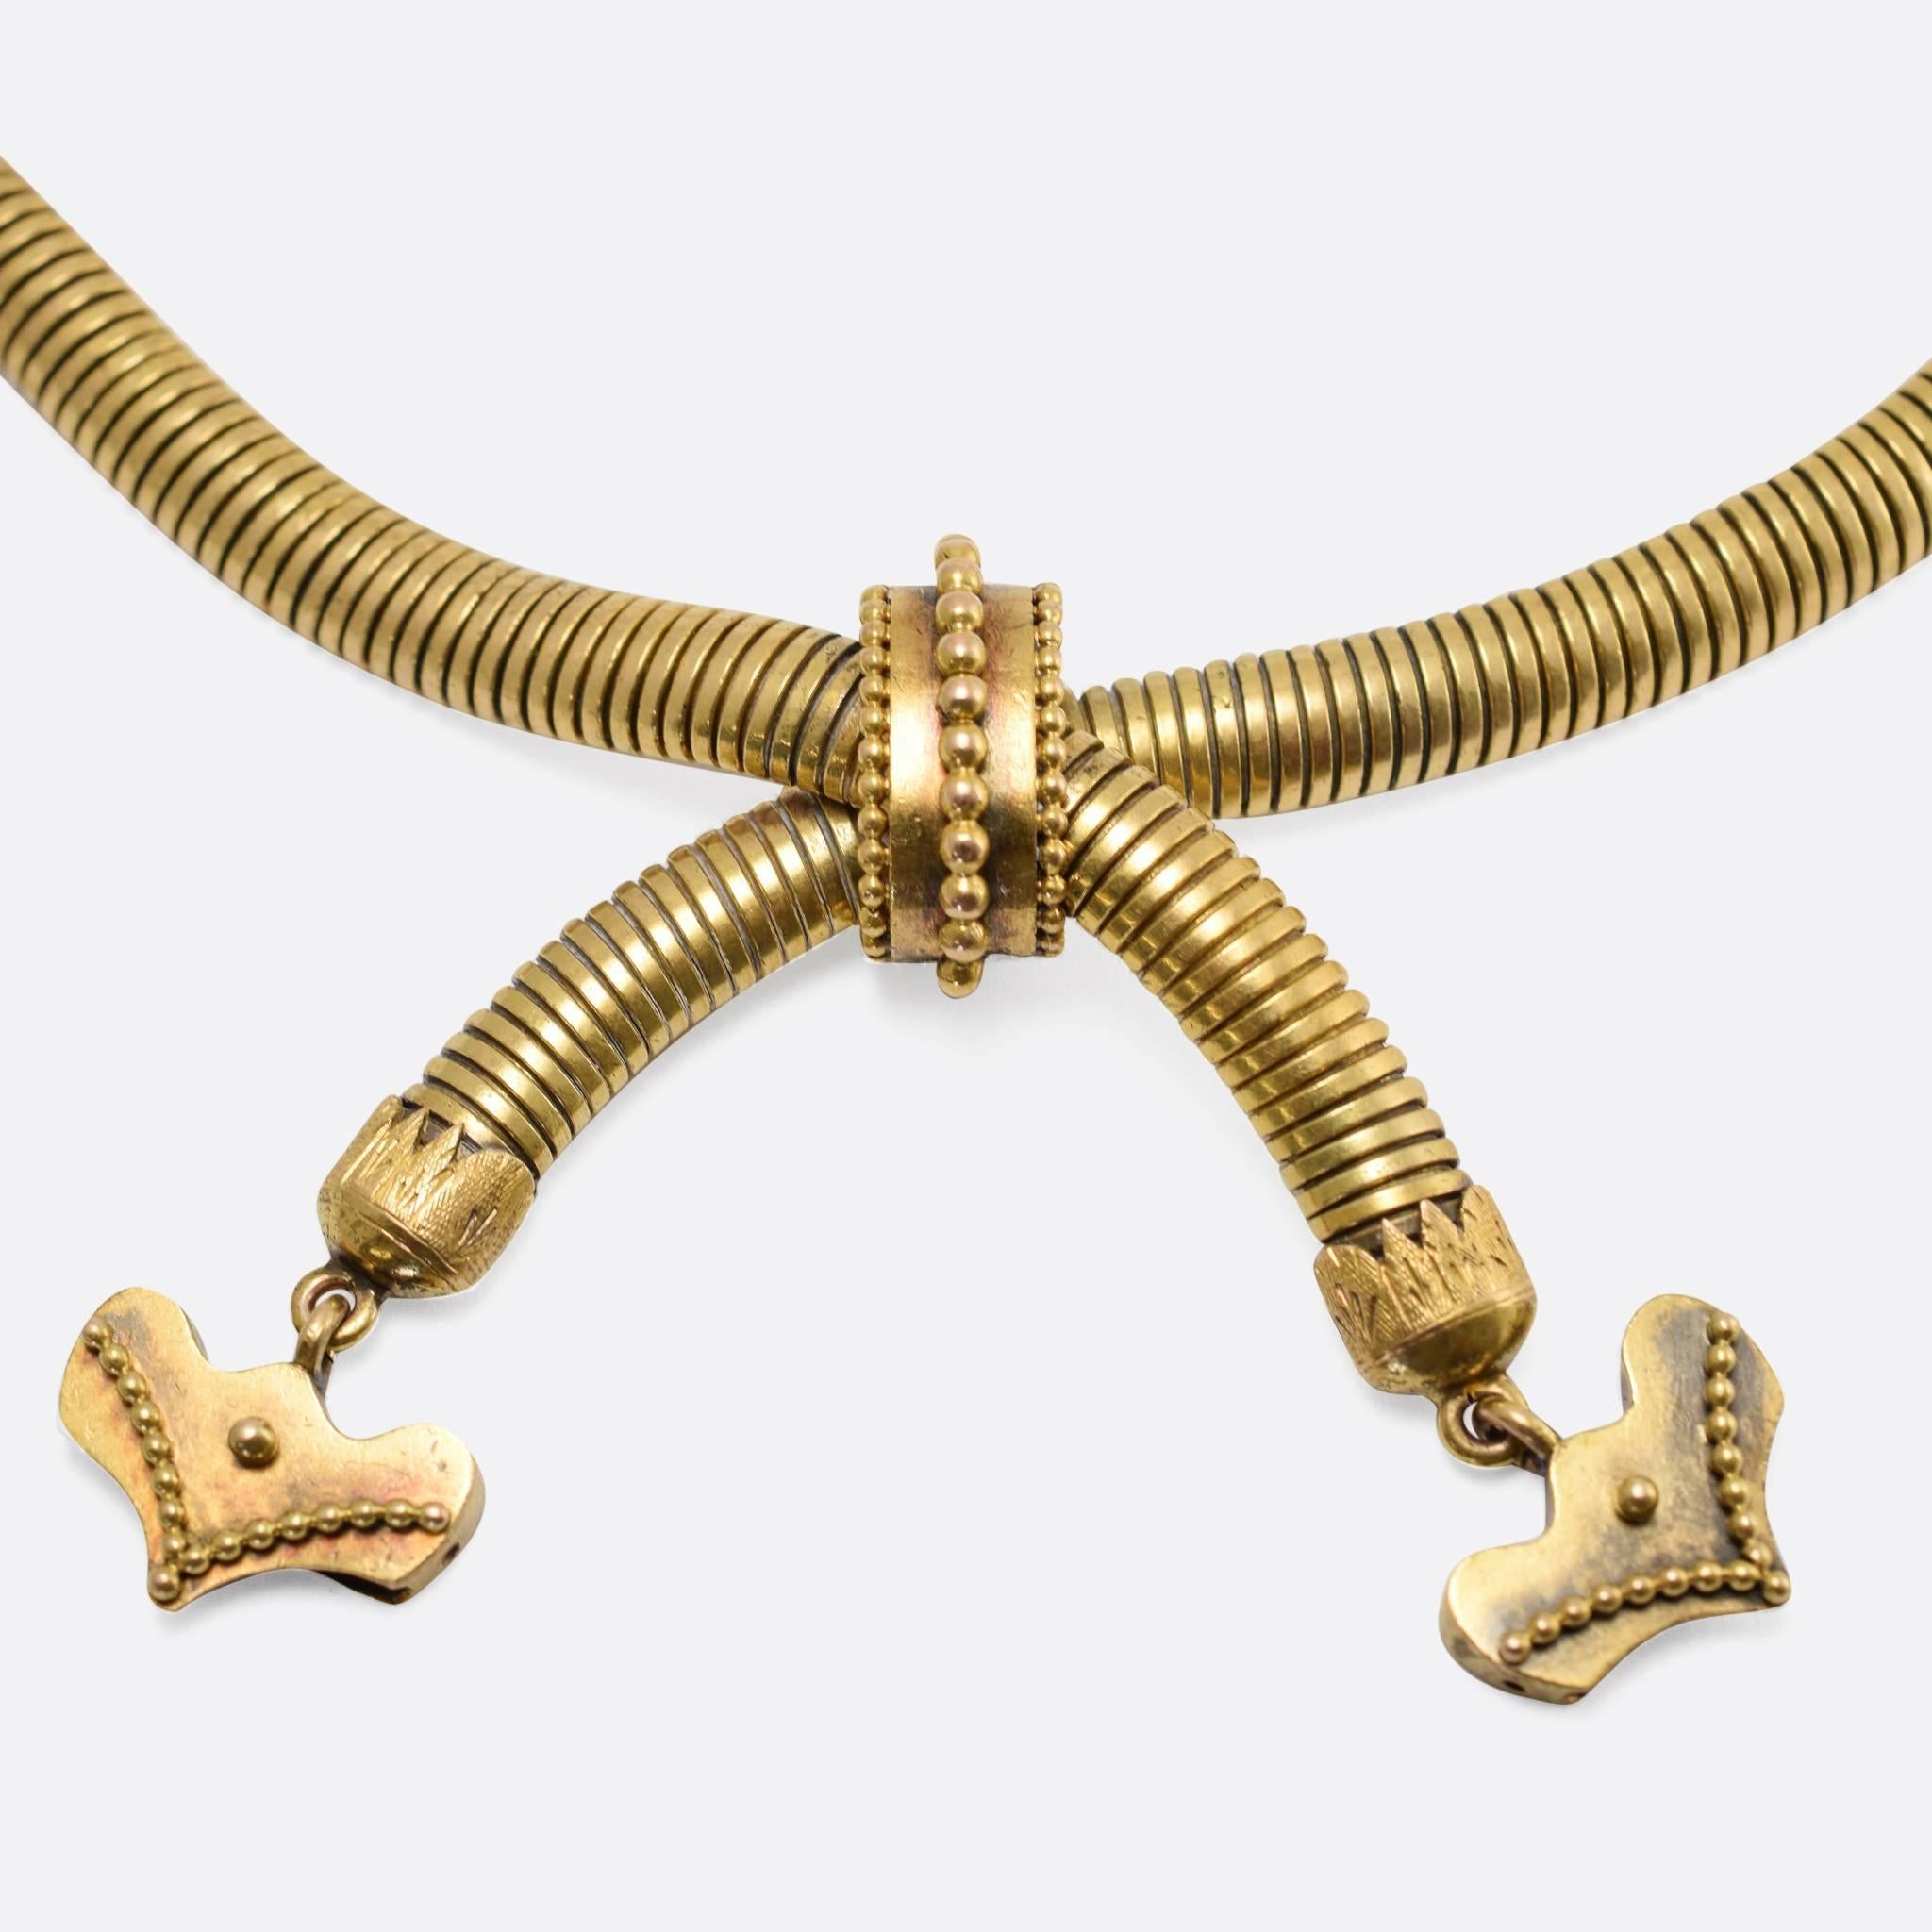 An excellent late 19th Century gaspipe collar necklace, modelled in rich 18k gold throughout. The gaspipe crosses over, held in place with a detailed gold hoop, and ending with stylized heart/arrow drops. A fine Victorian piece, dating to c.1890.